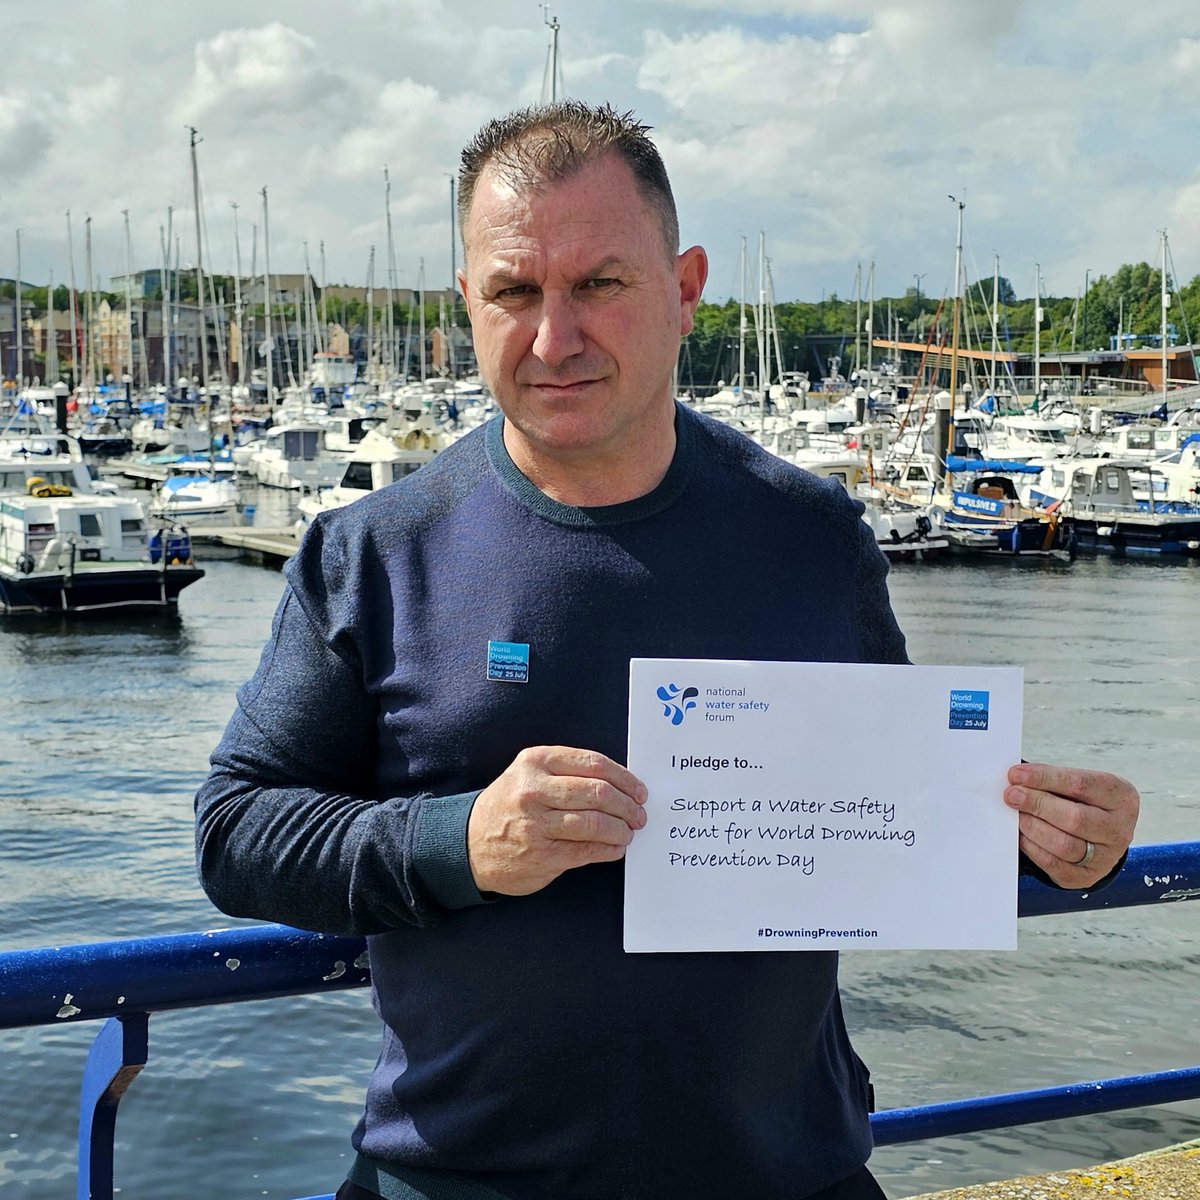 Today is World Drowning Prevention Day Pledge to... Support A Water Safety Event for World Drowning Prevention Day 
#DrowningPrevention #RespectTheWater #DrowningPreventionDay